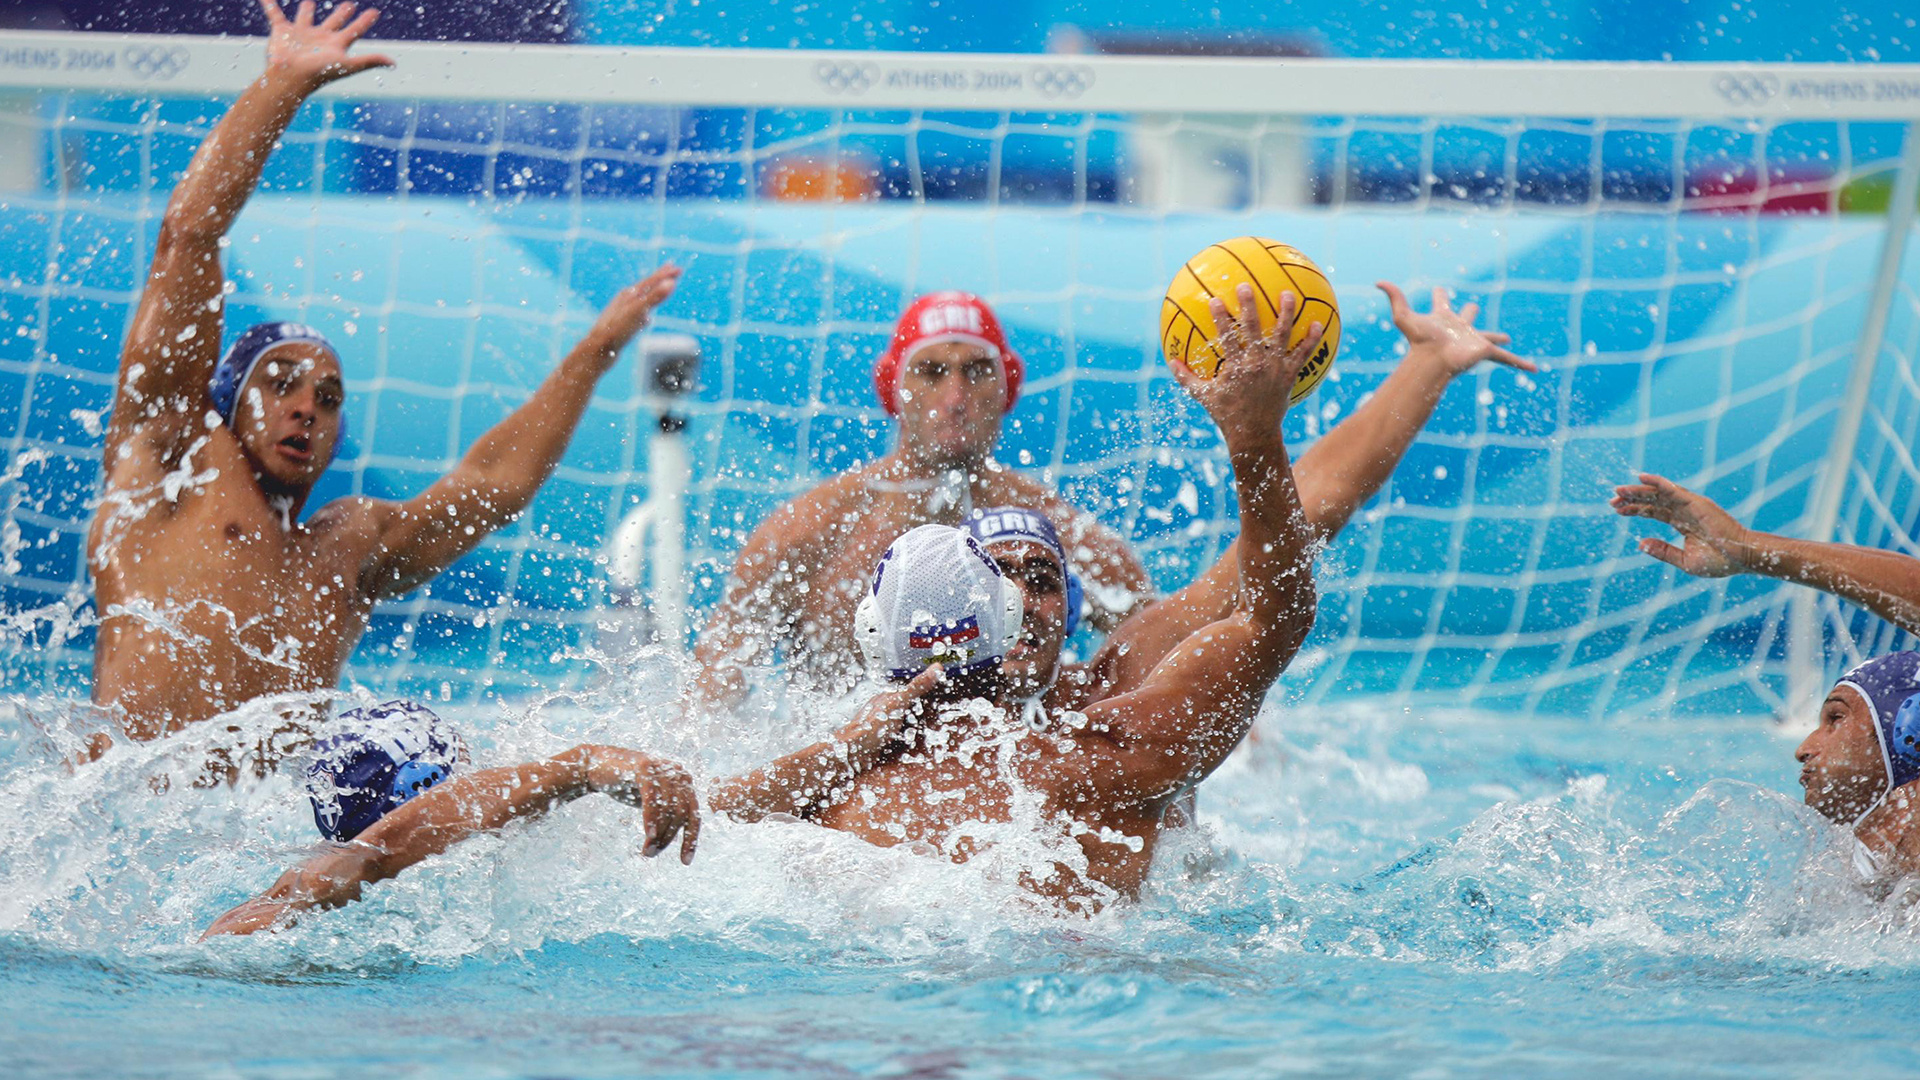 Water Polo: Greece vs. Russian Federation, The 2004 Athens Summer Olympics. 1920x1080 Full HD Background.